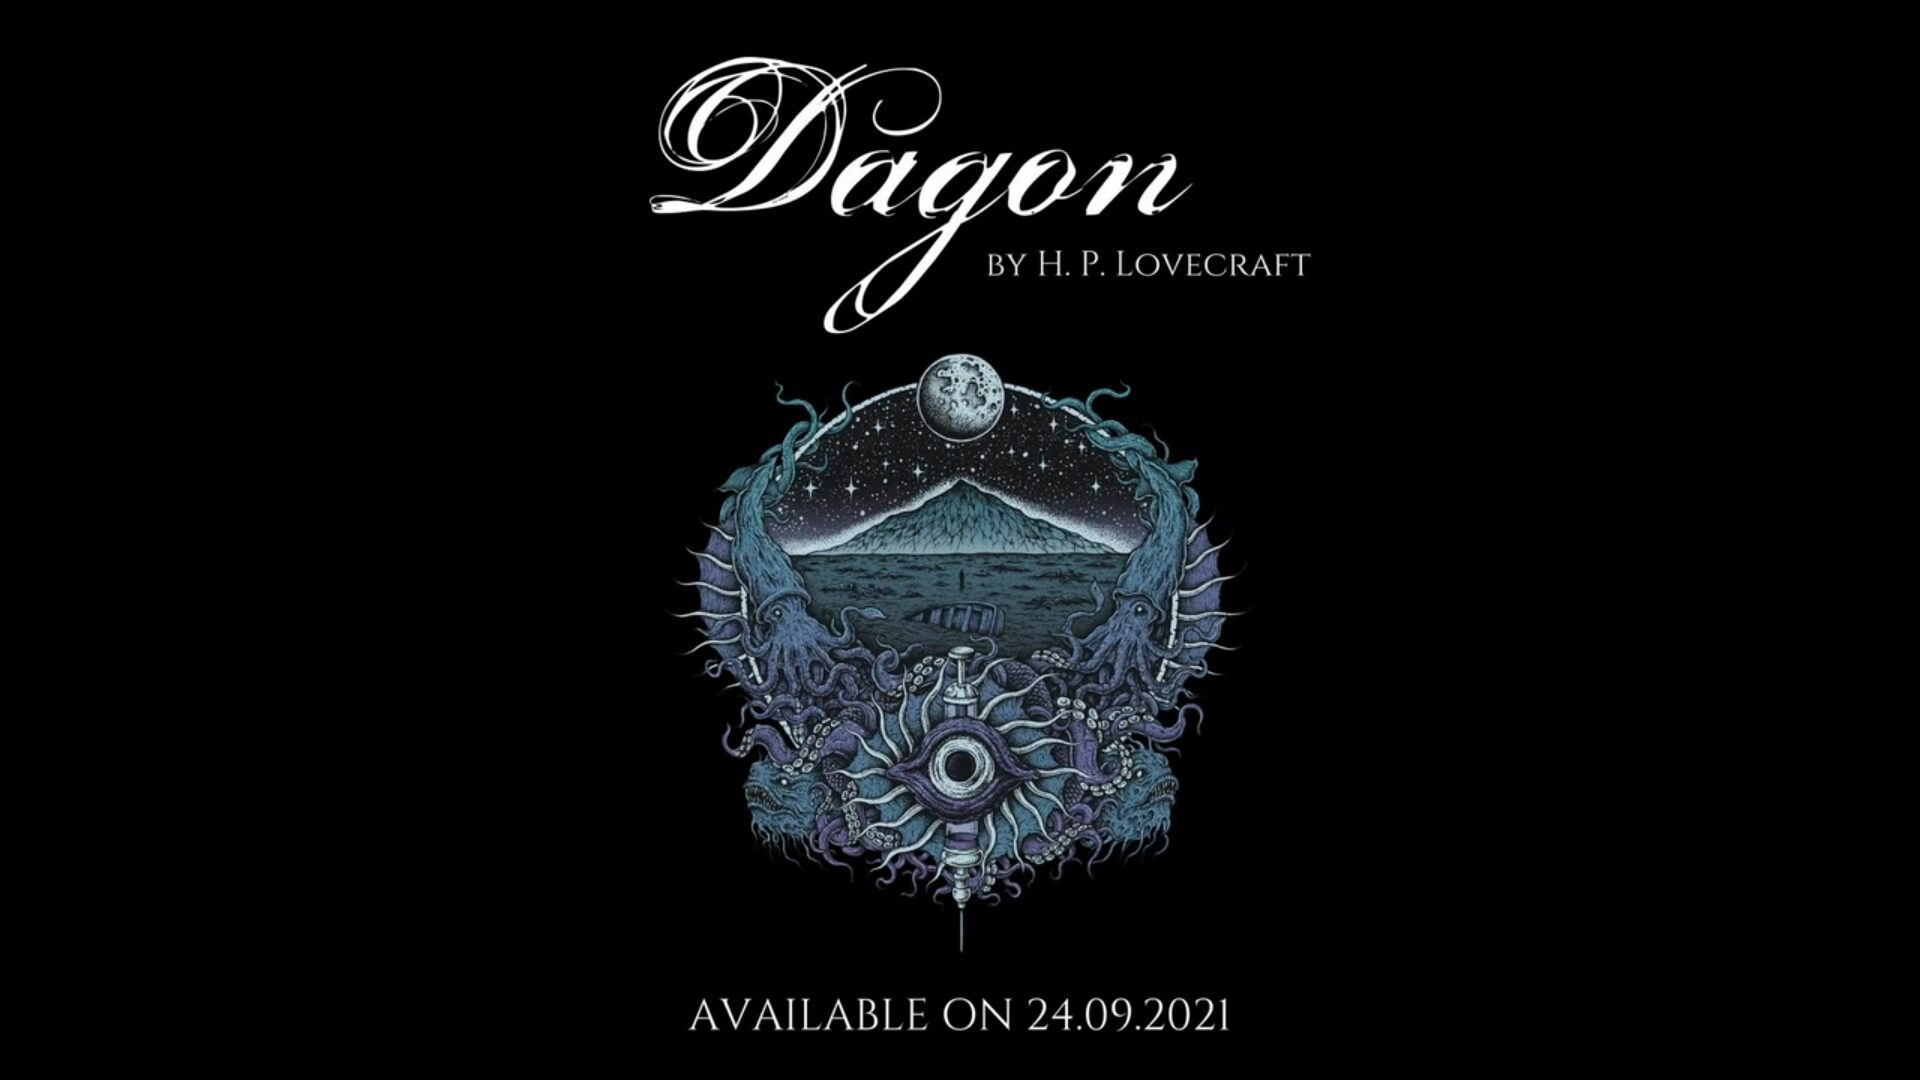 Indie Devs Put Out Free Game Based On H.P. Lovecraft’s Dagon